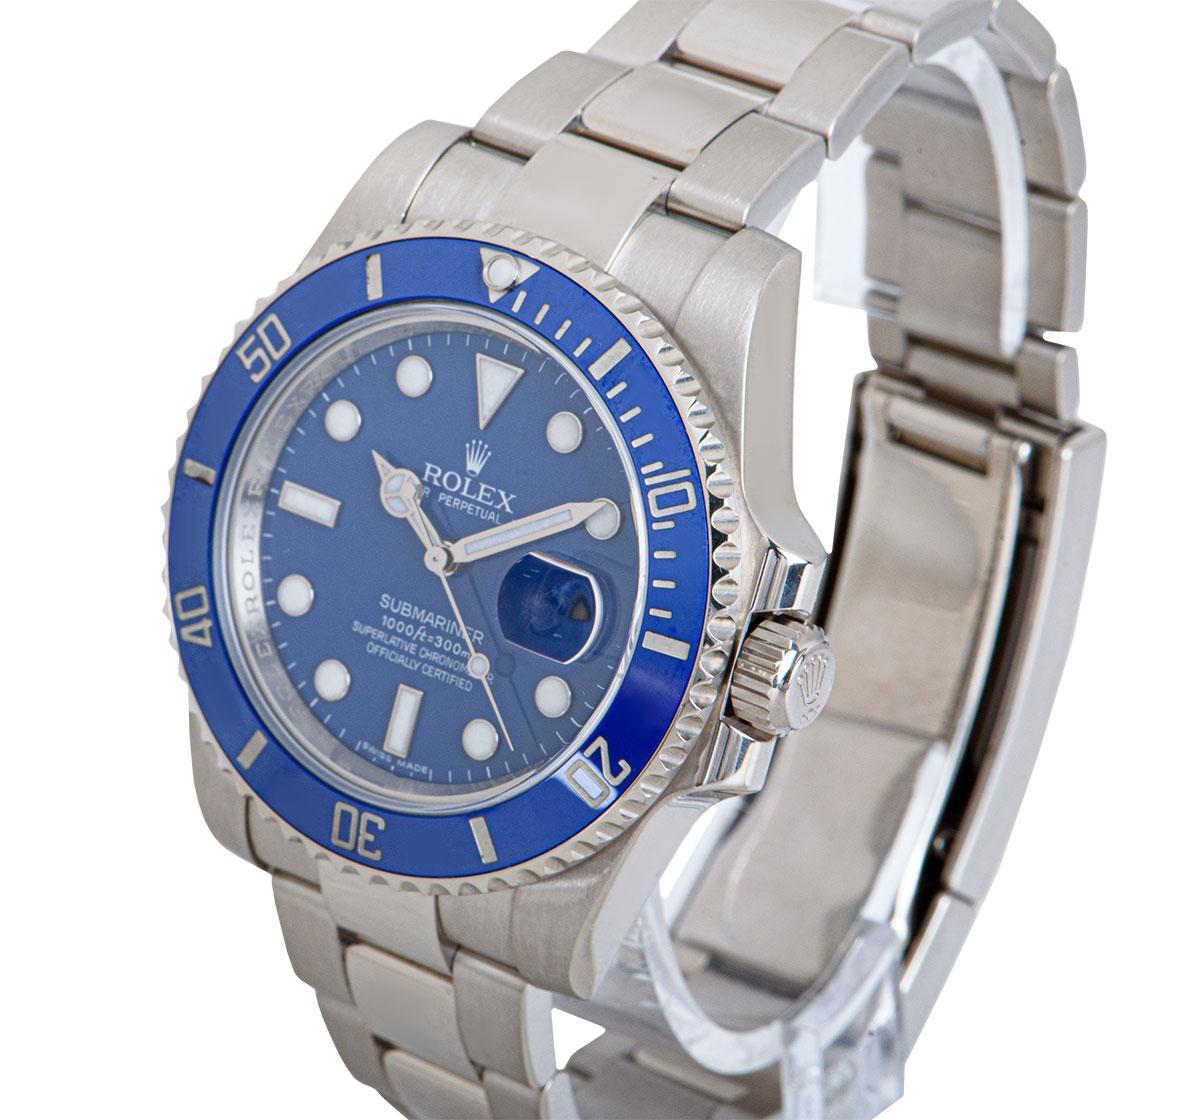 A 40mm 18k White Gold Oyster Perpetual Submariner Date Gents Wristwatch, blue dial with applied hour markers, date at 3 0'clock, an 18k white gold uni-directional rotating bezel with a blue ceramic bezel insert, an 18k white gold oyster bracelet